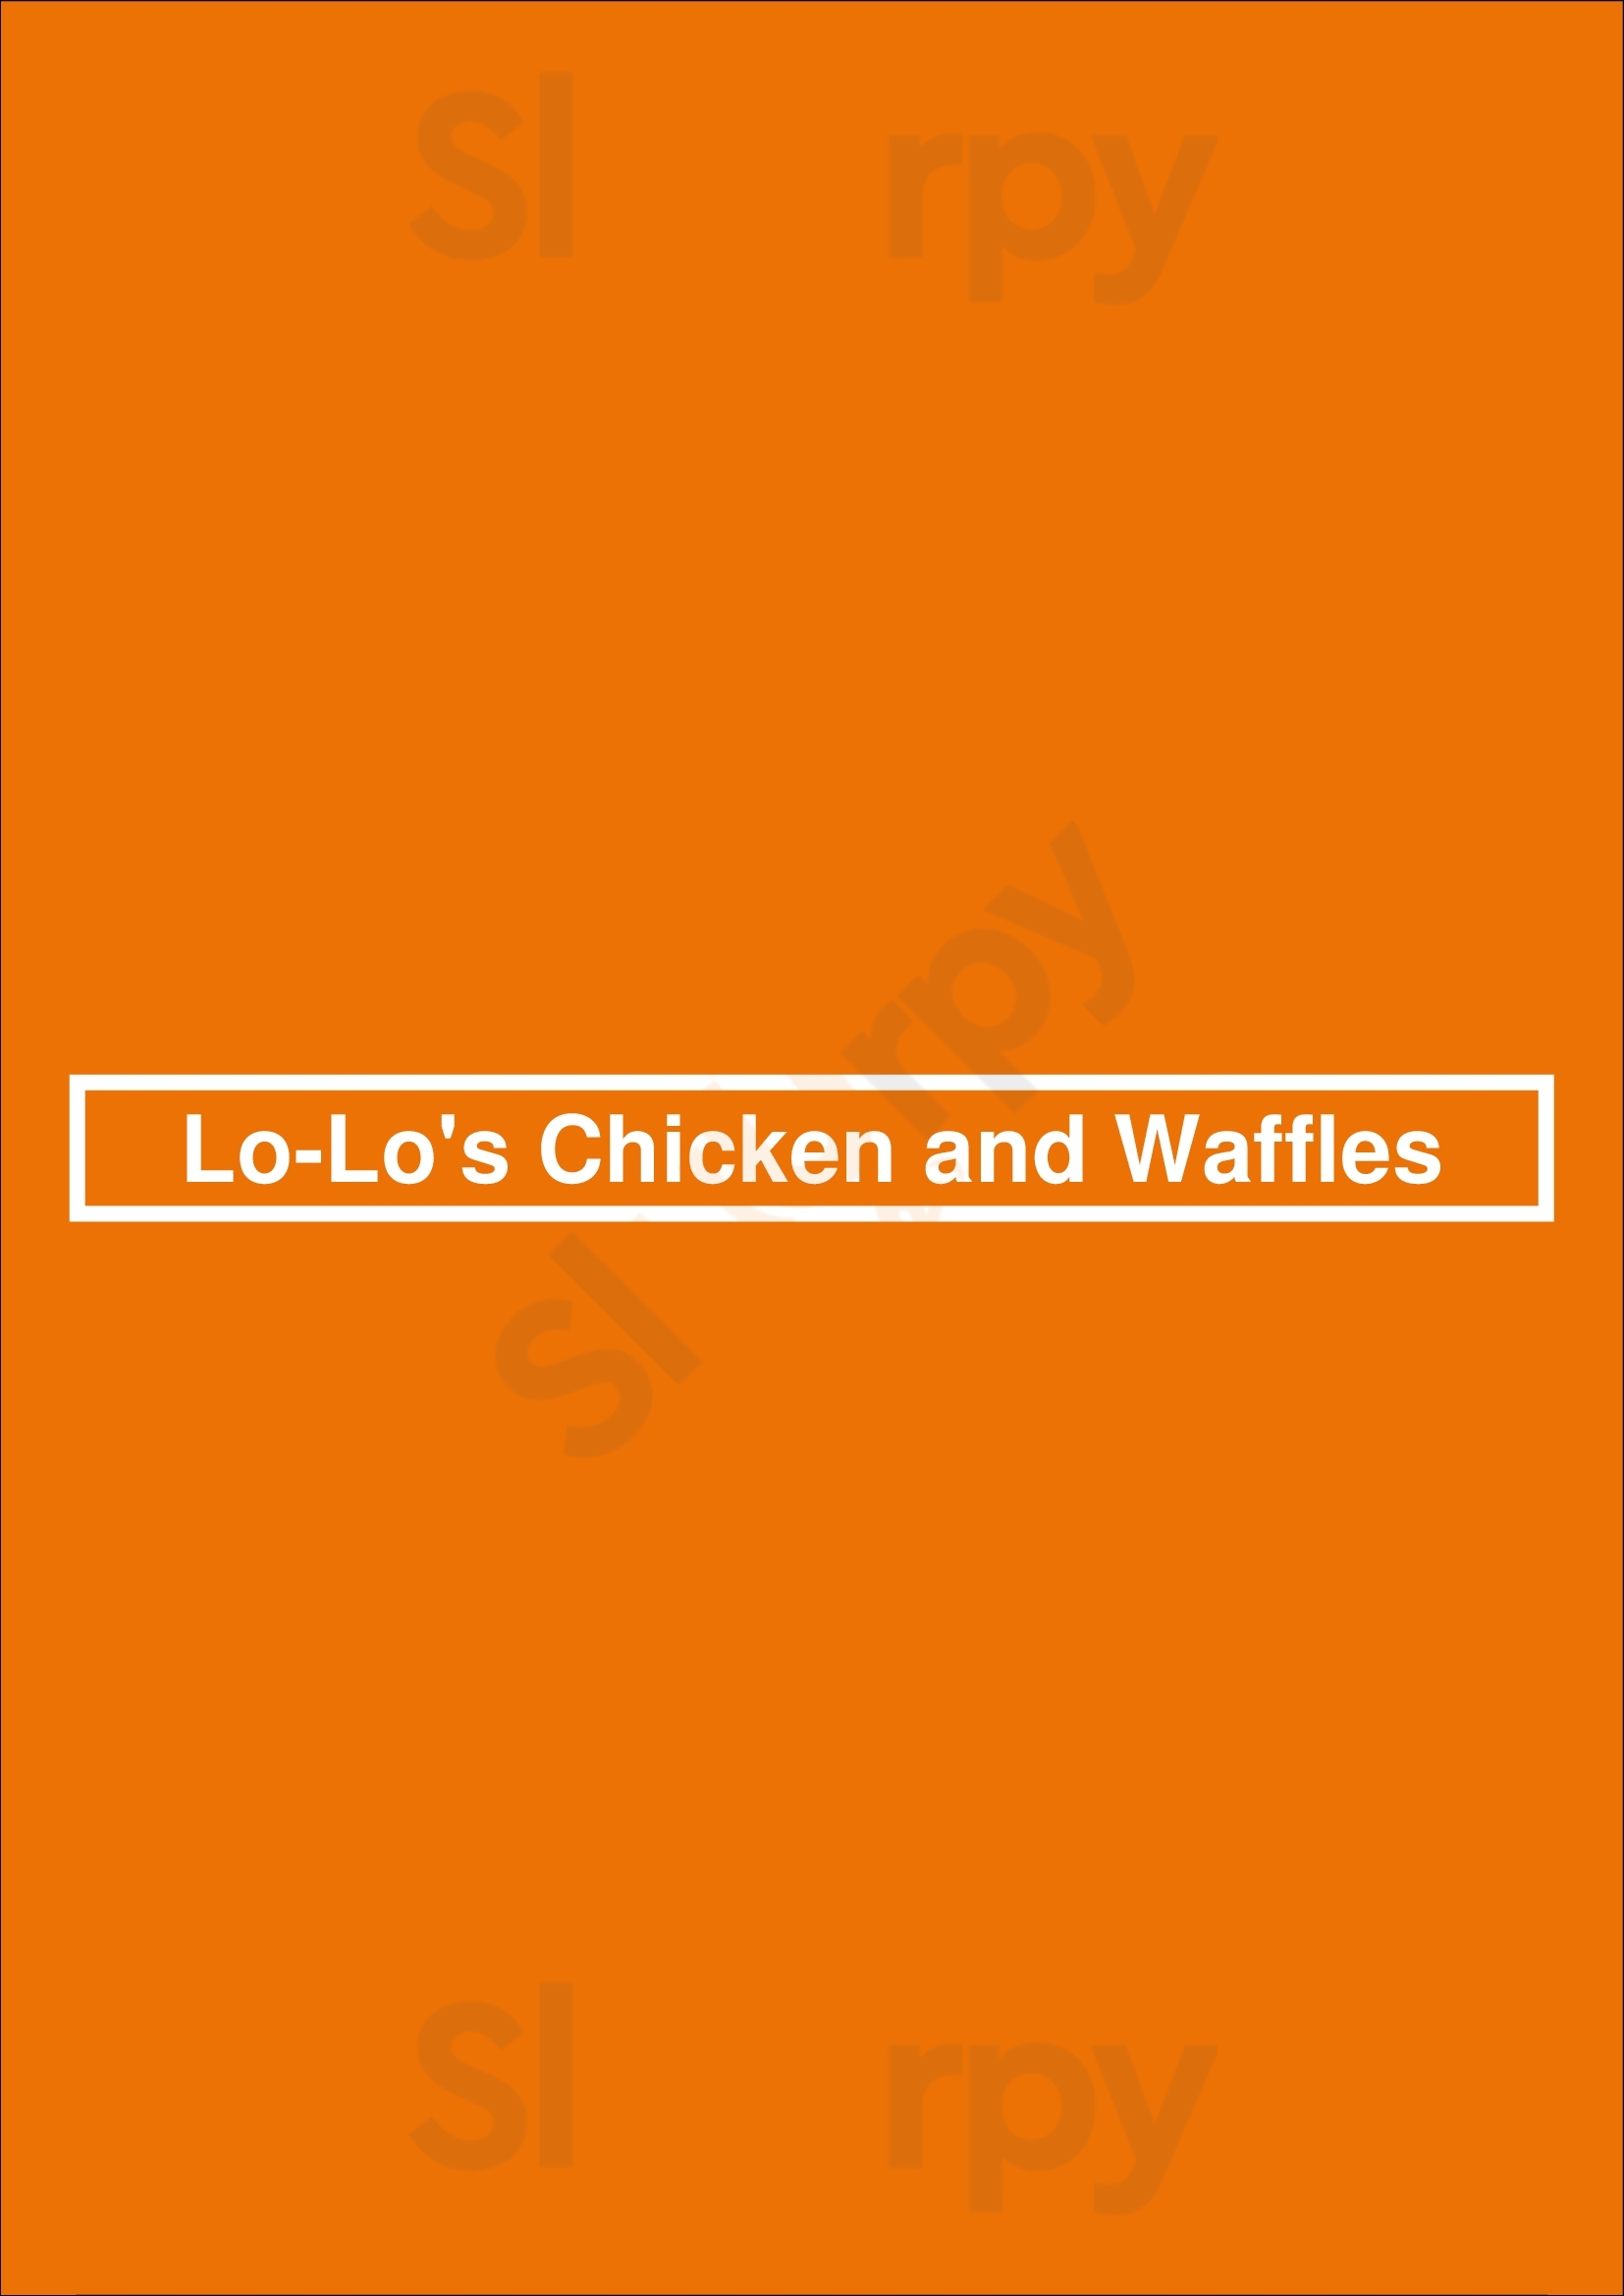 Lo-lo's Chicken And Waffles Scottsdale Menu - 1